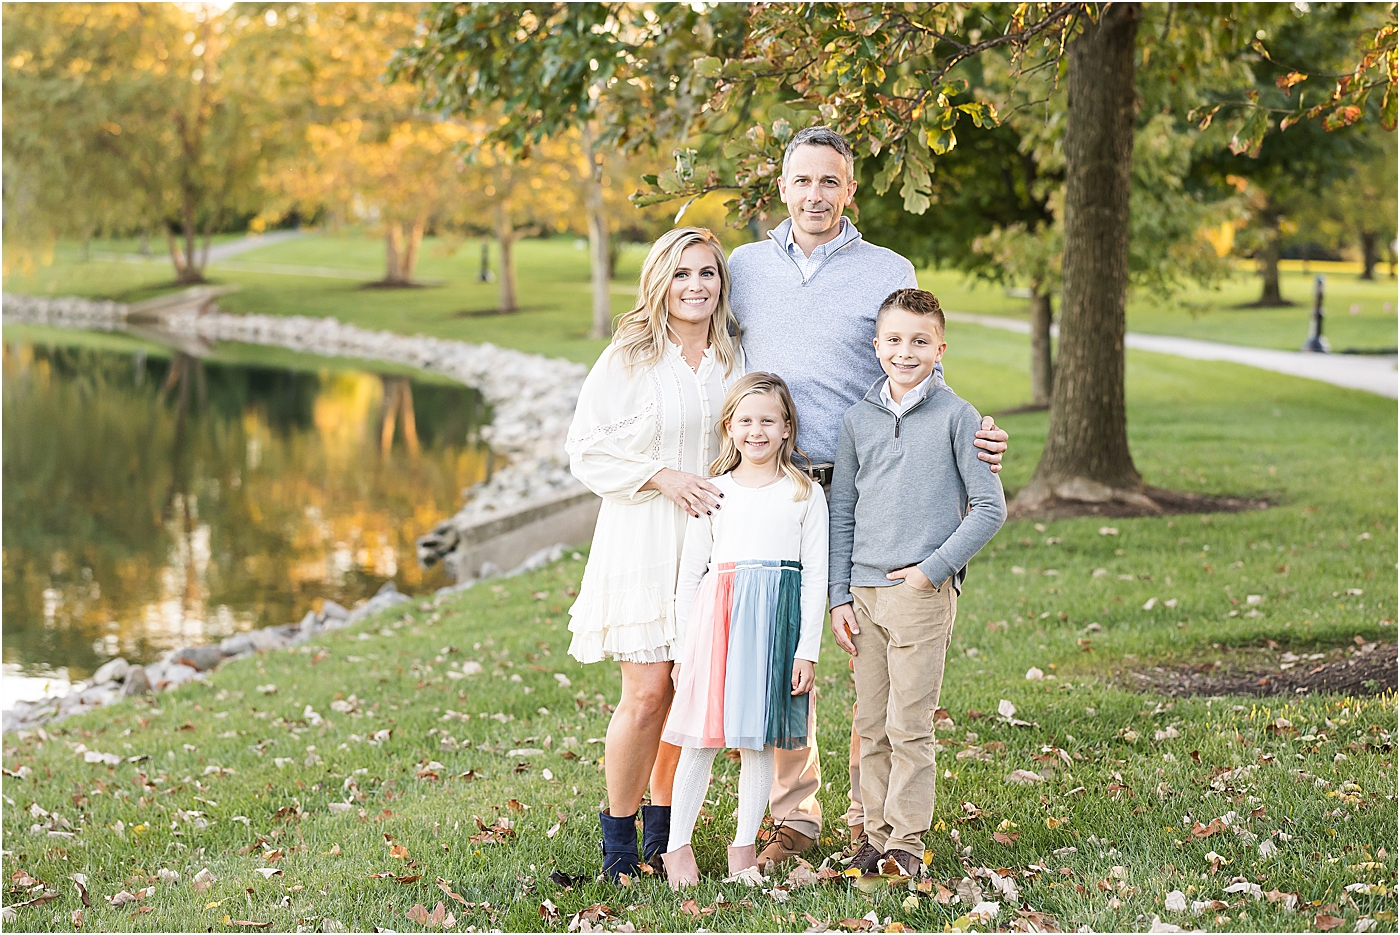 Sunset family session at the Village of West Clay with Lindsay Konopa Photography.